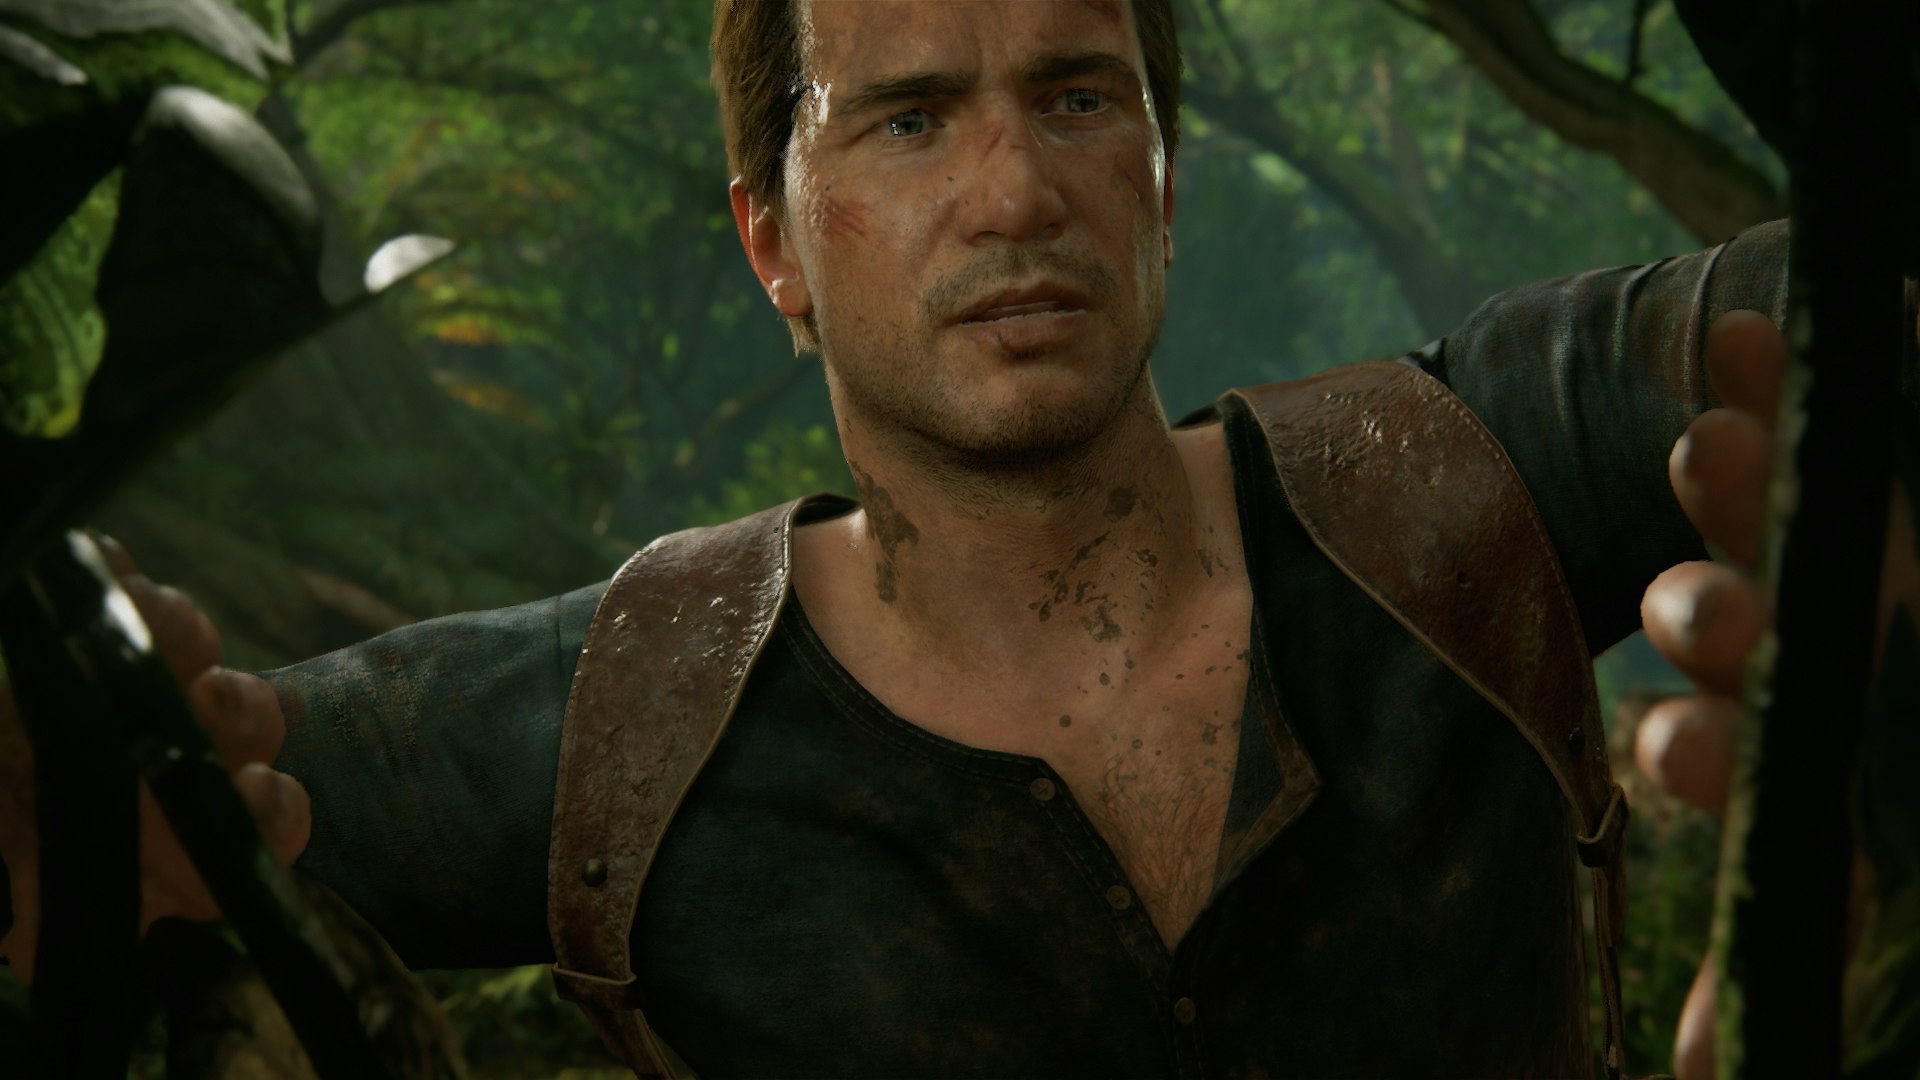 Here's your first gameplay footage from 'Uncharted 4: A Thief's End